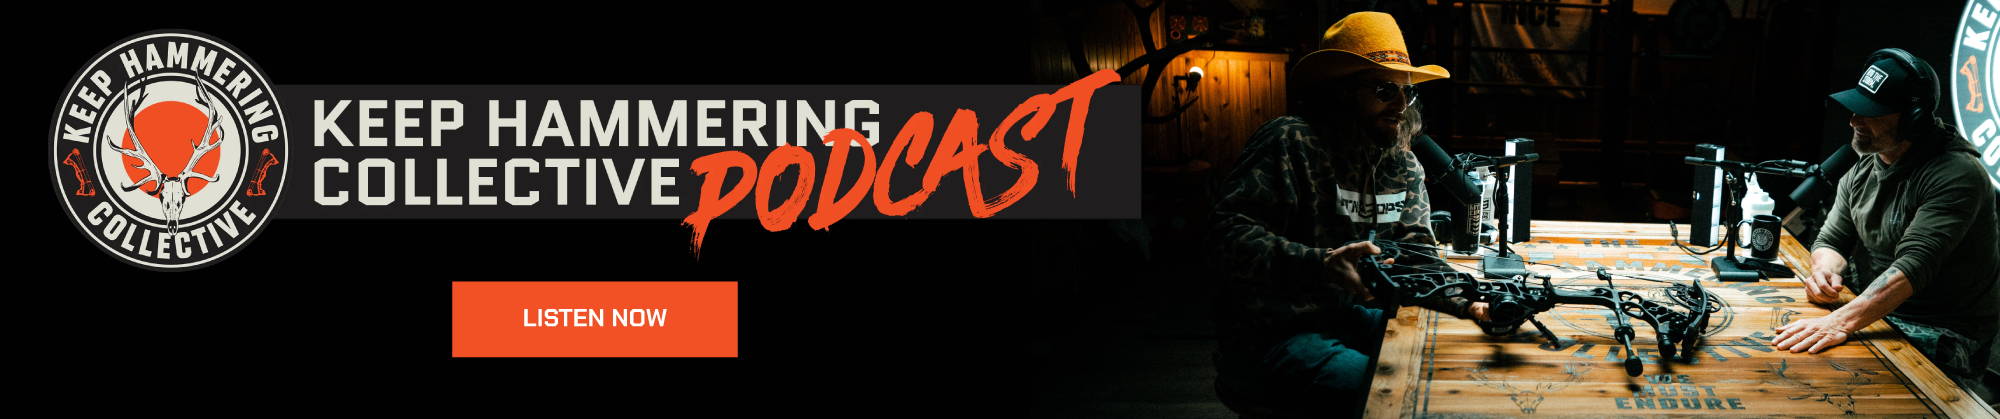 Keep Hammering Collective Podcast